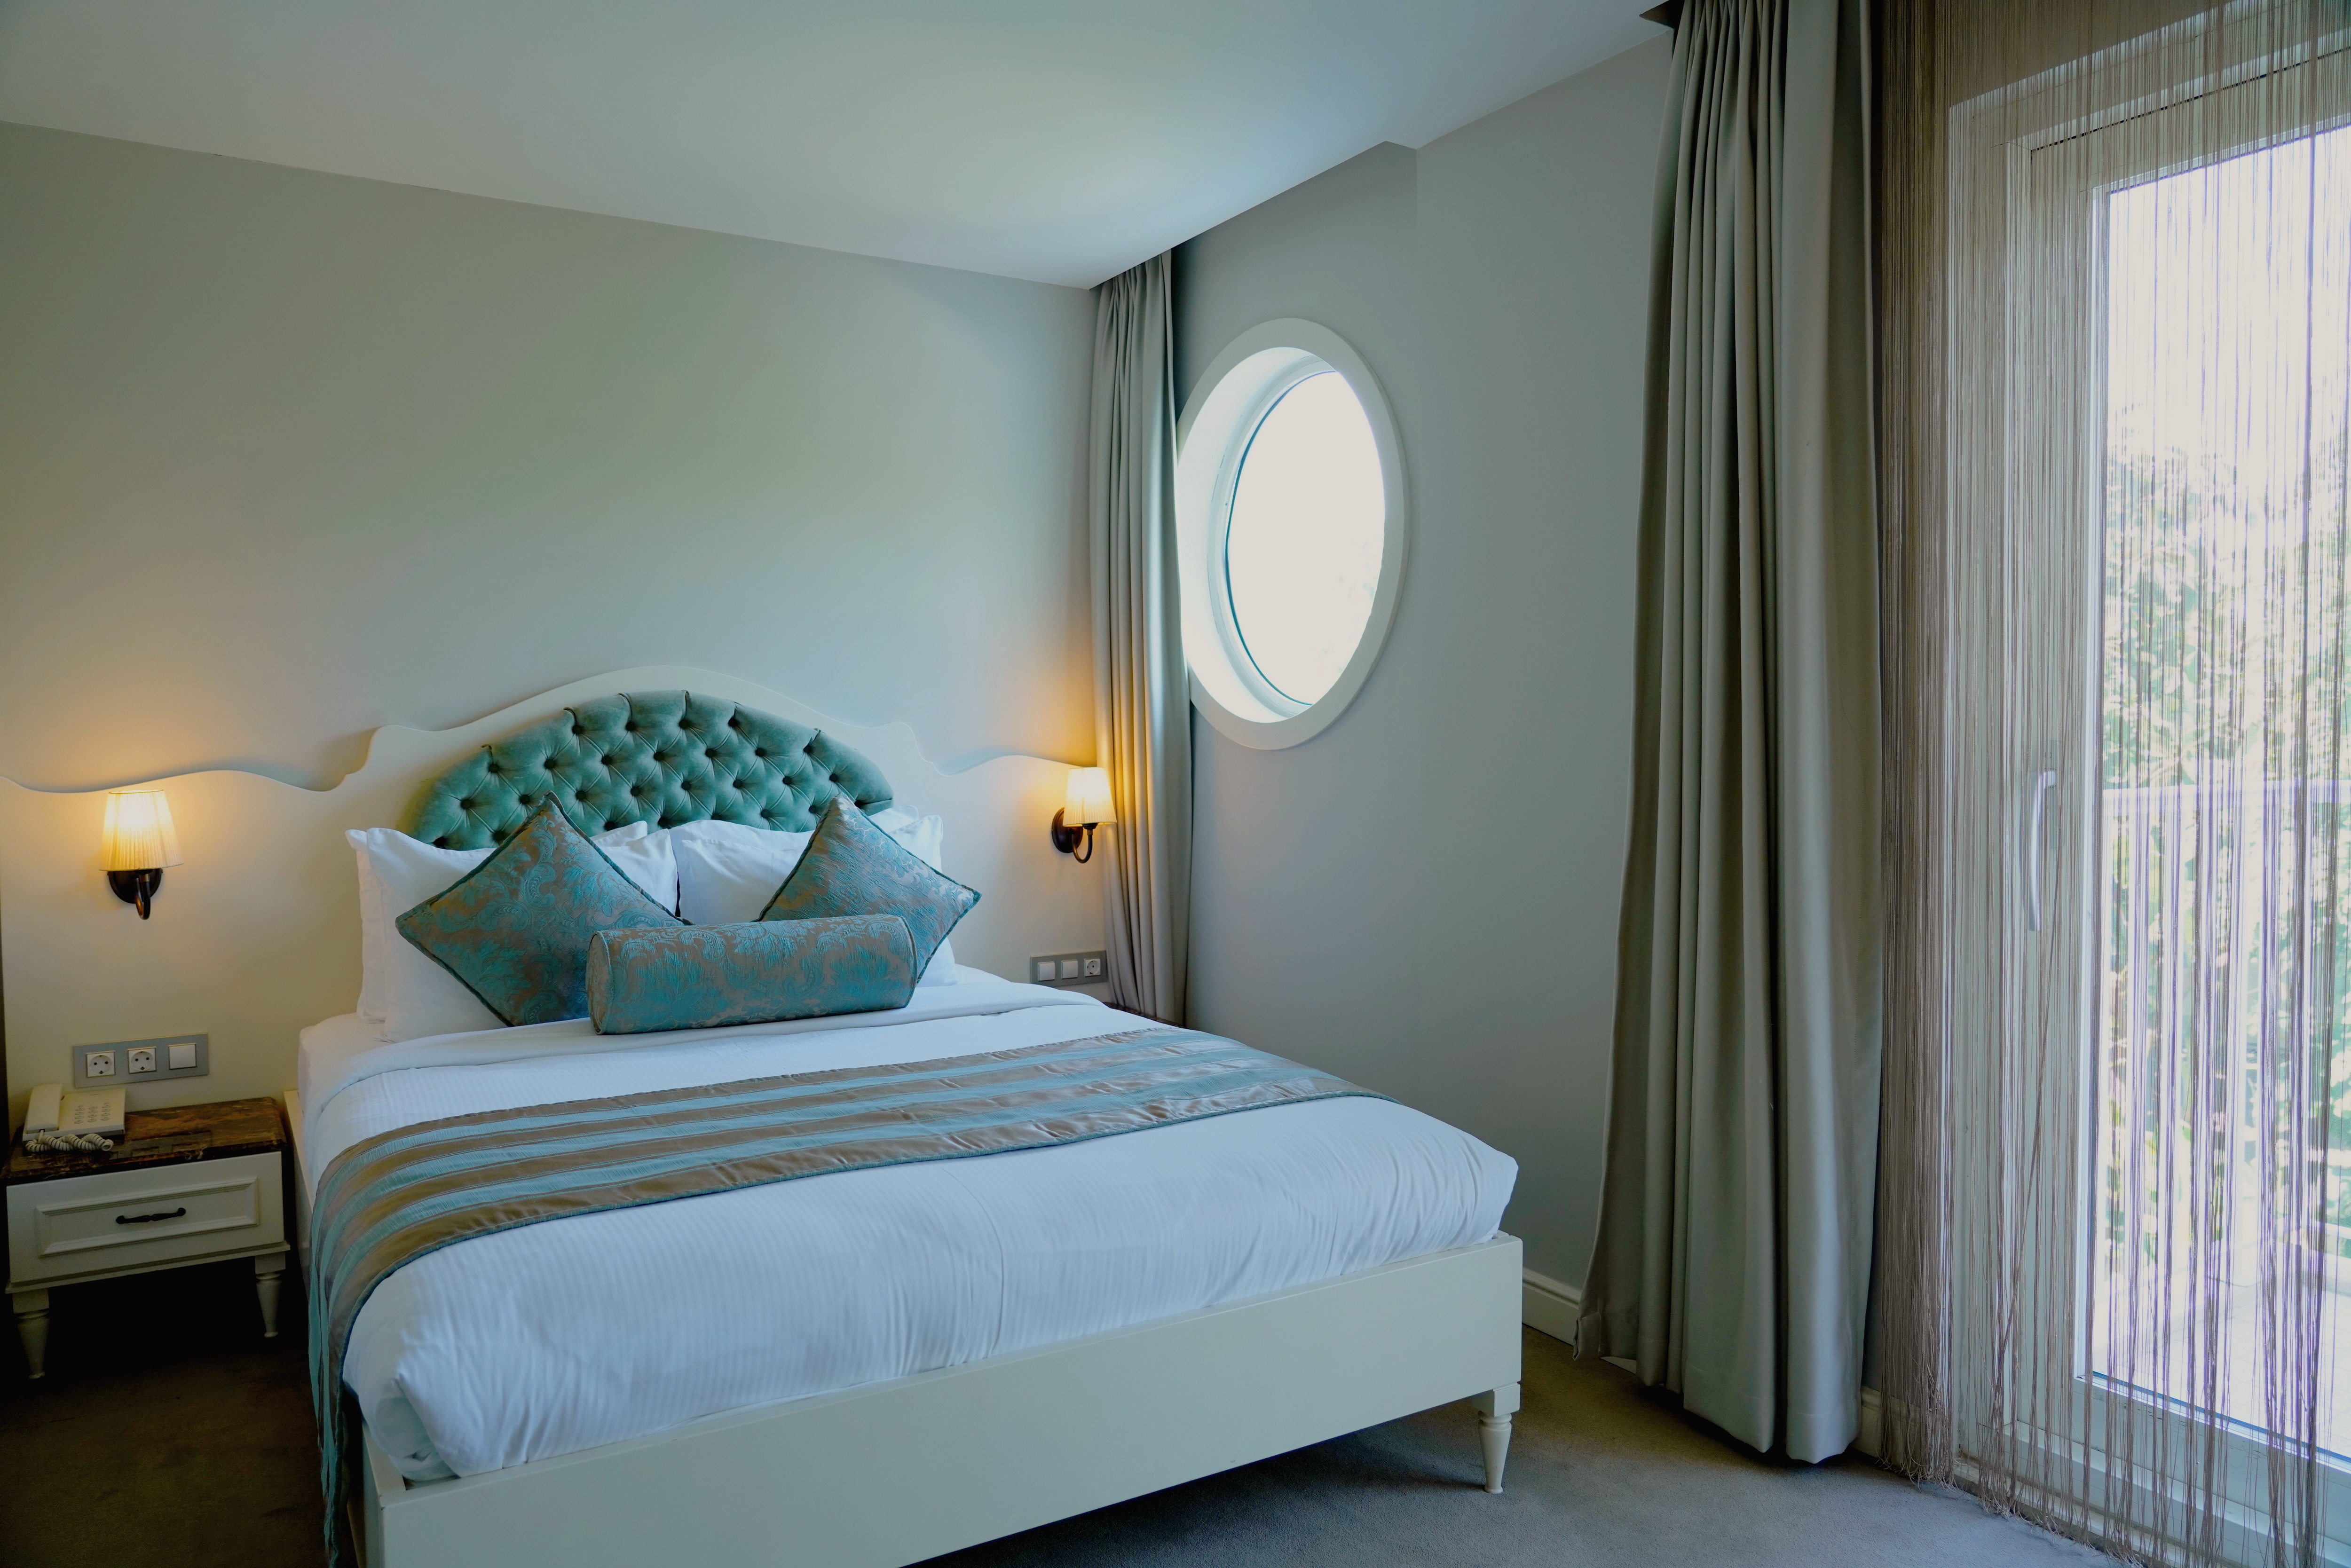 Yacht Classic Hotel- Boutique Class